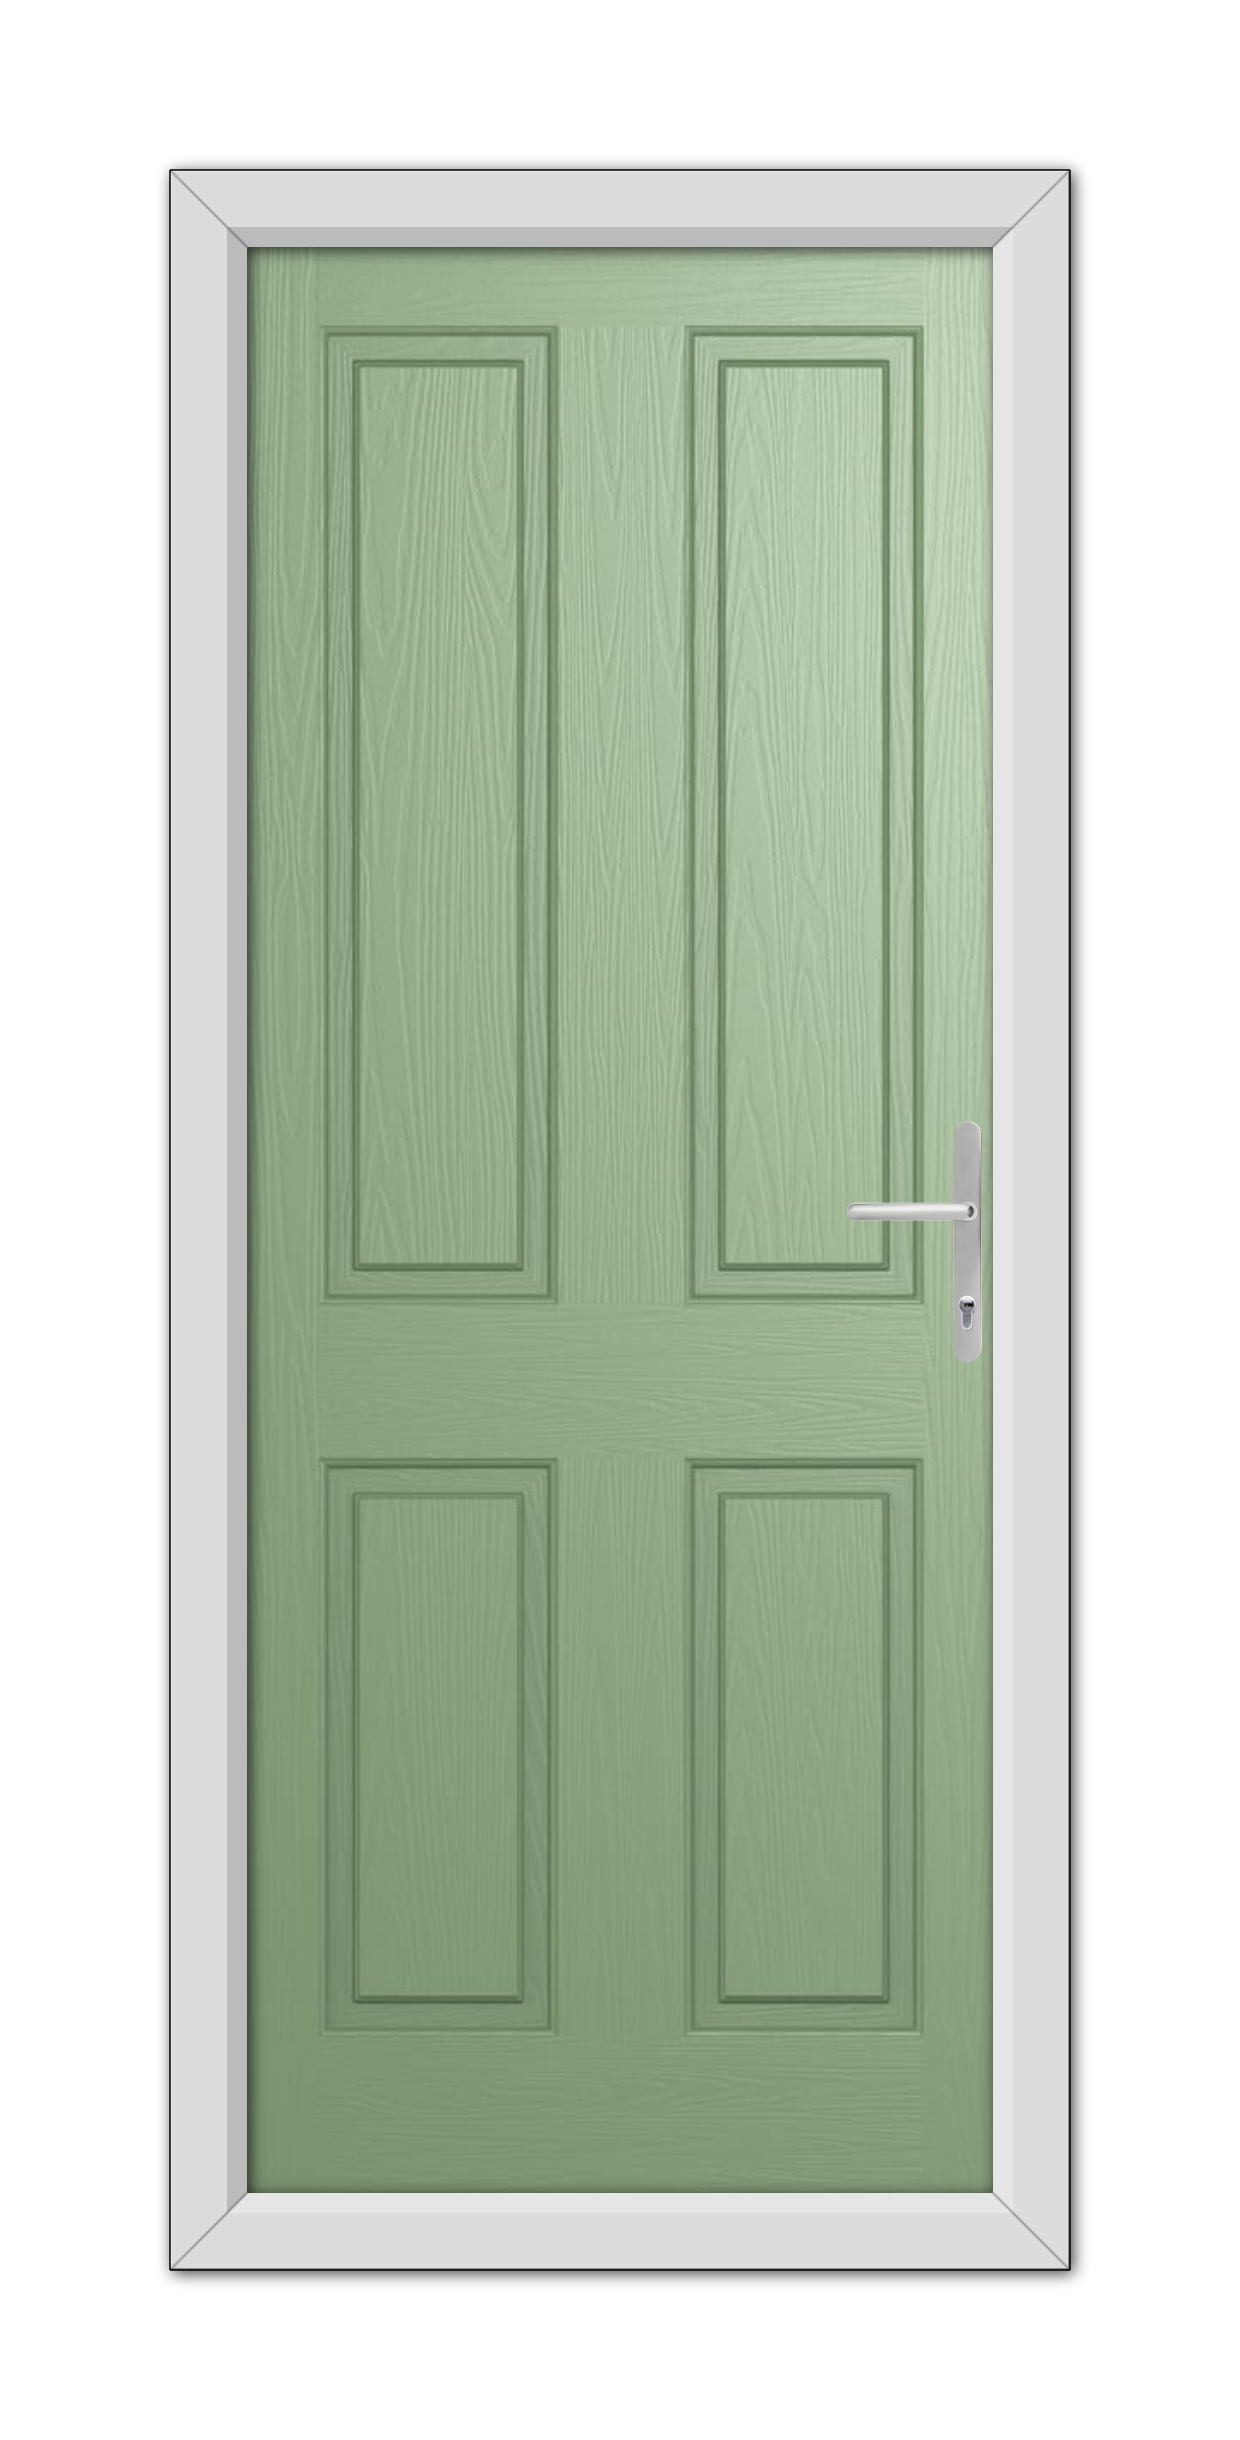 A Chartwell Green Whitmore Solid Composite Door 48mm Timber Core with four rectangular panels and a silver handle, framed by a white door frame.